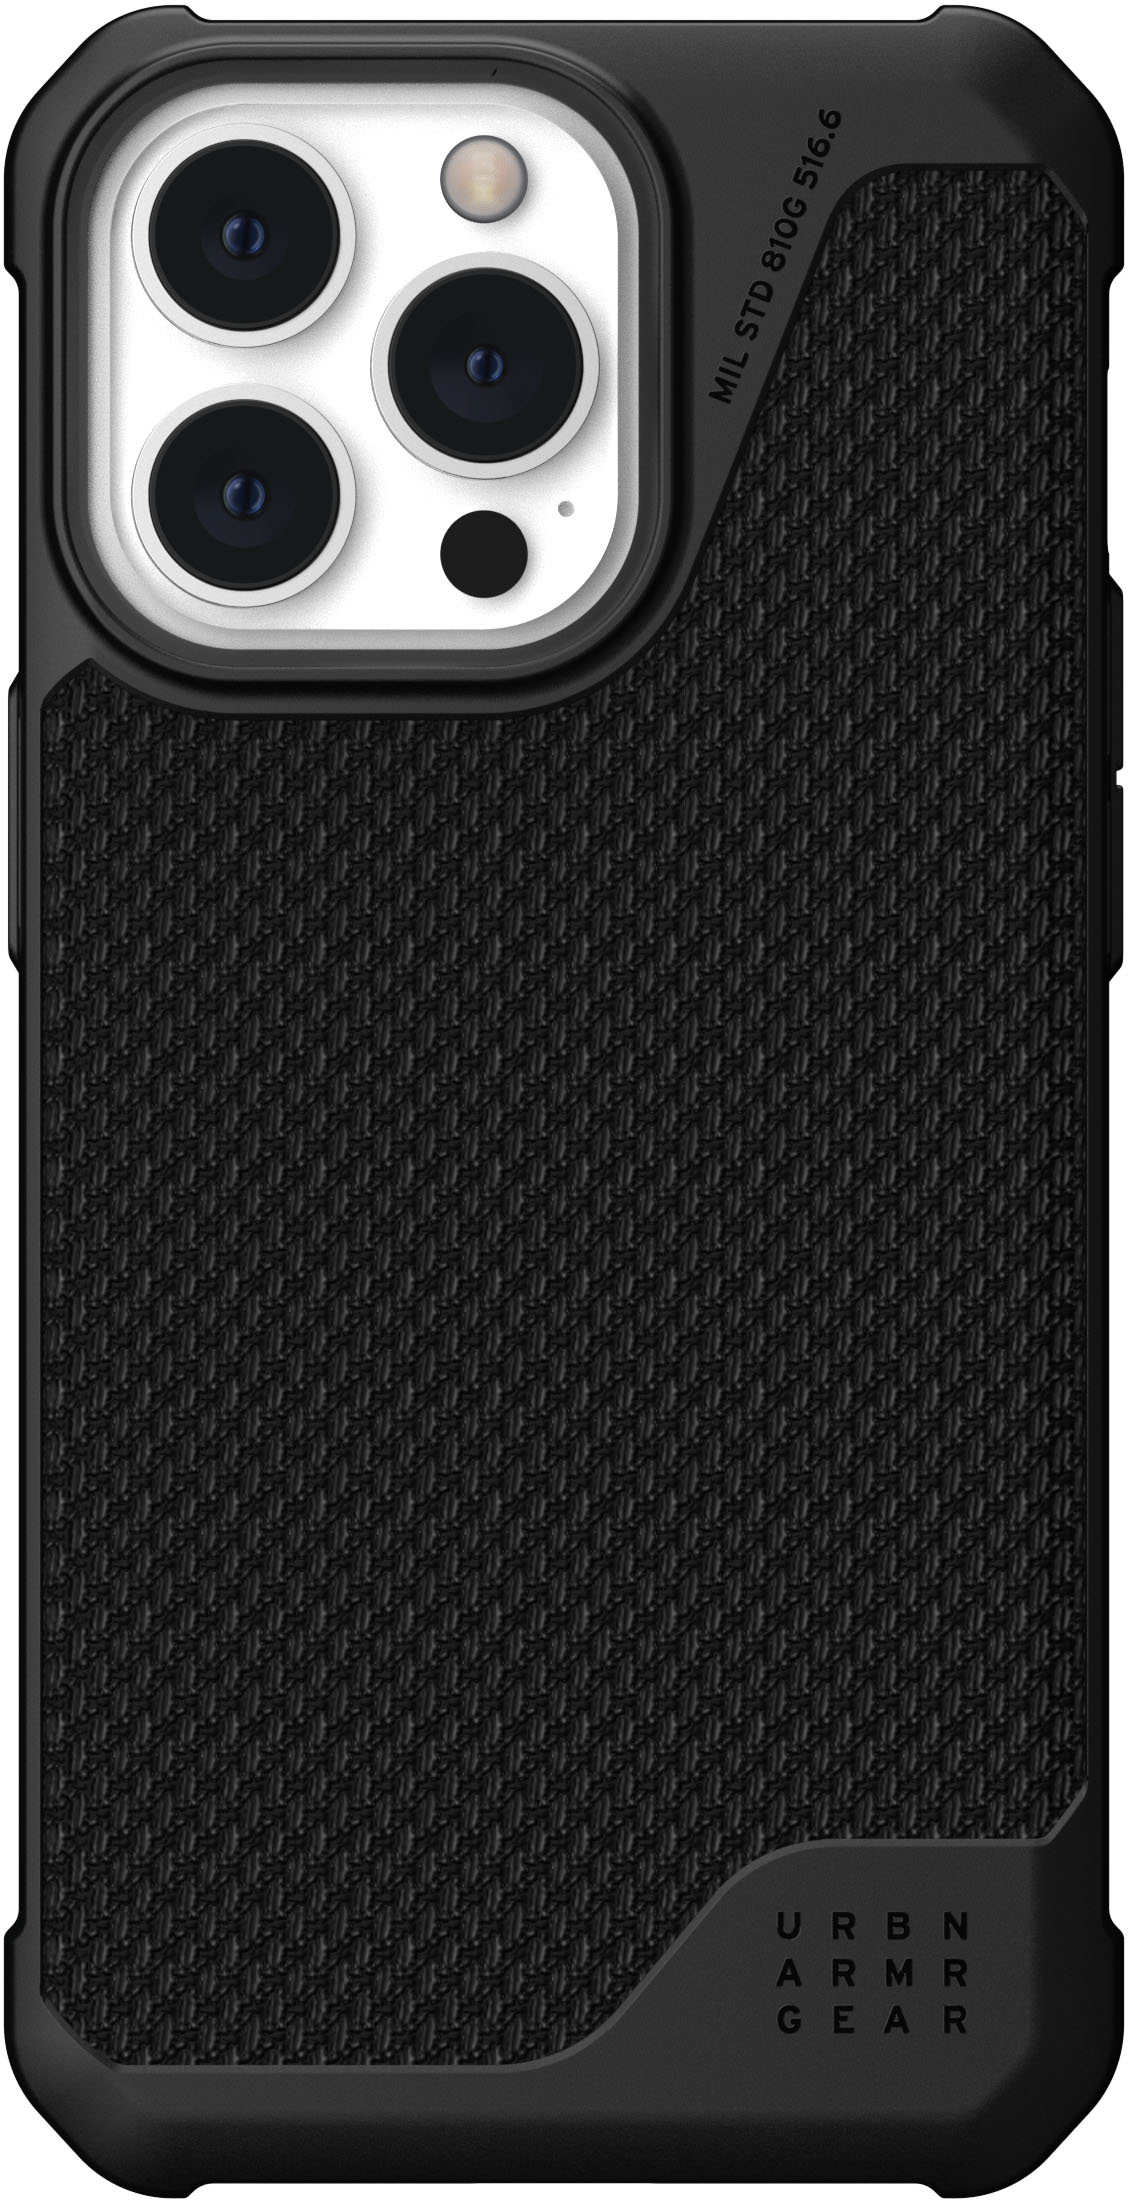 Angle View: UAG - Metropolis LT MAGSAFE case for iPhone 13 Pro - Black